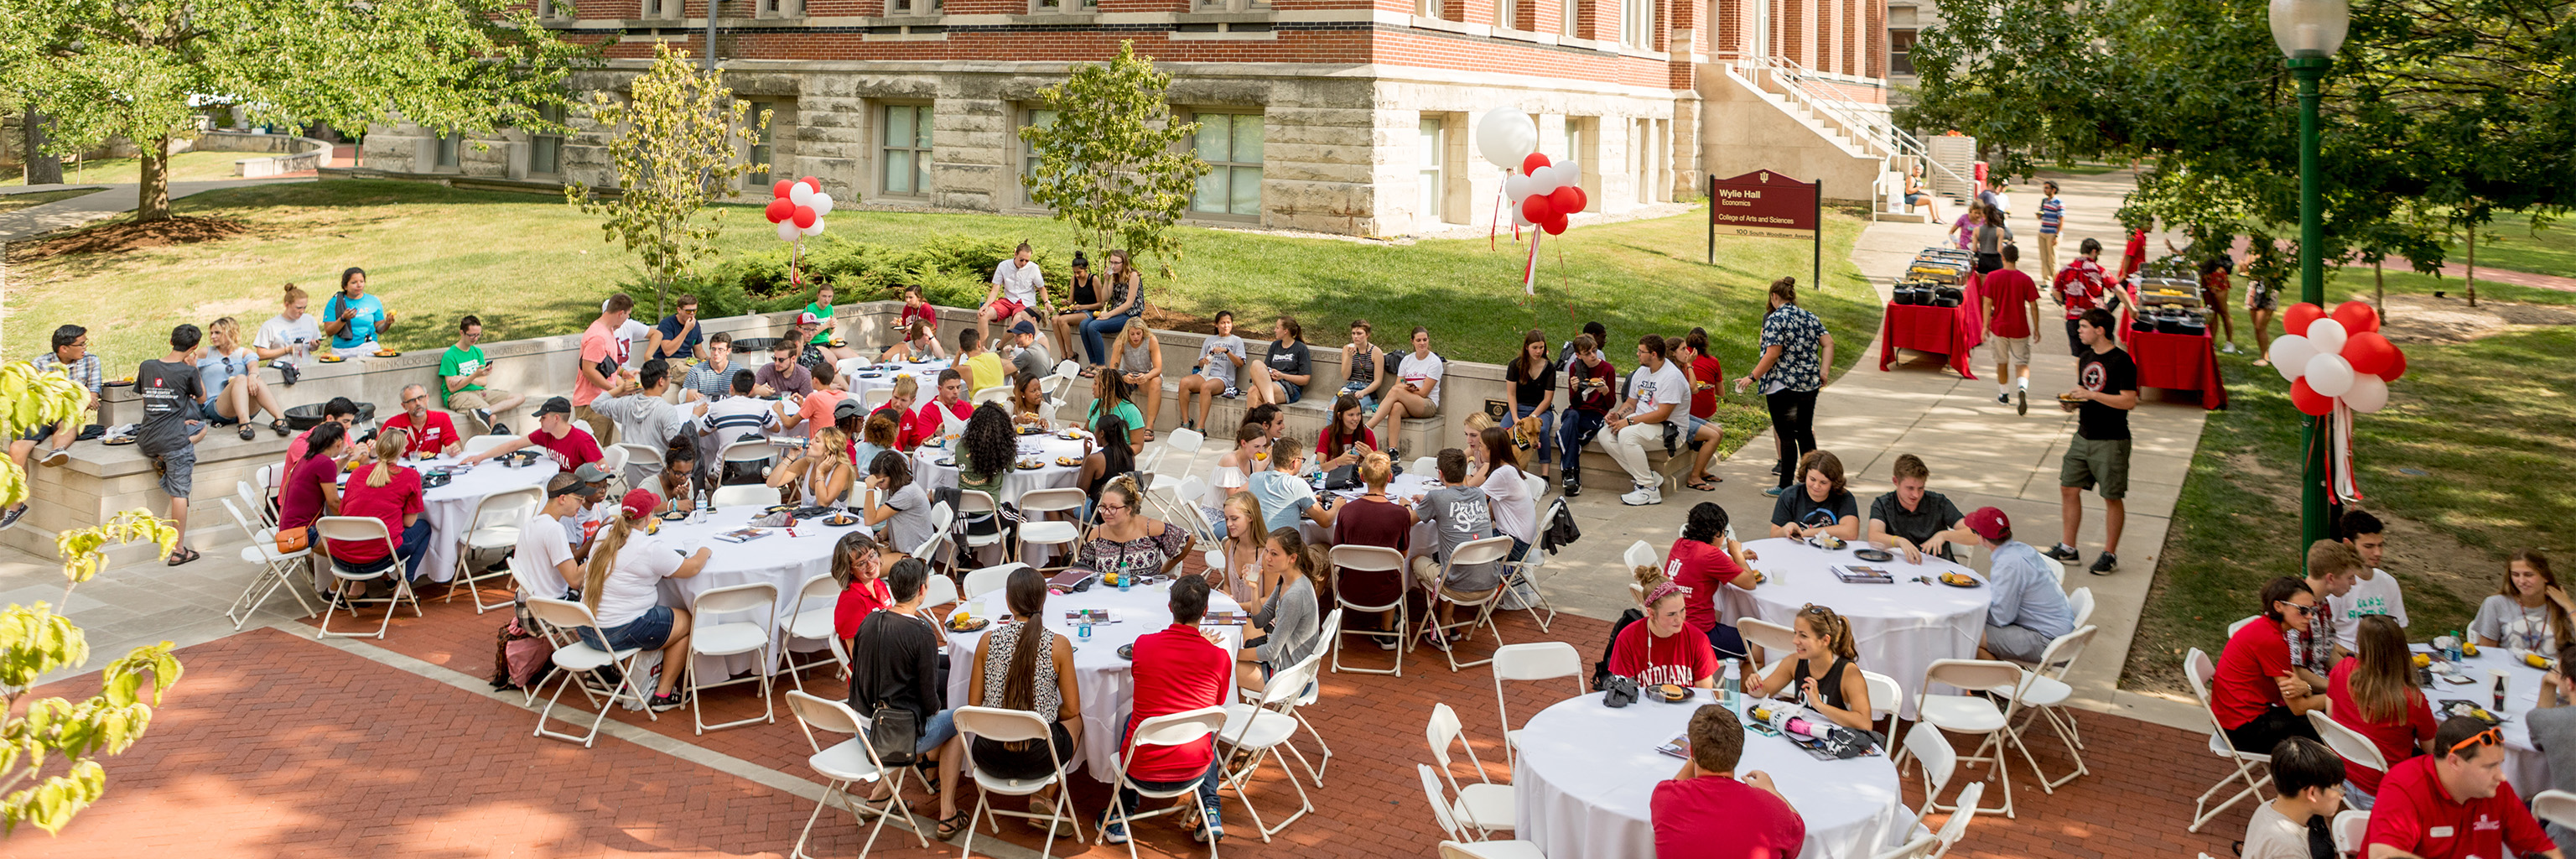 Students and College staff enjoying a meal together at tables outside.